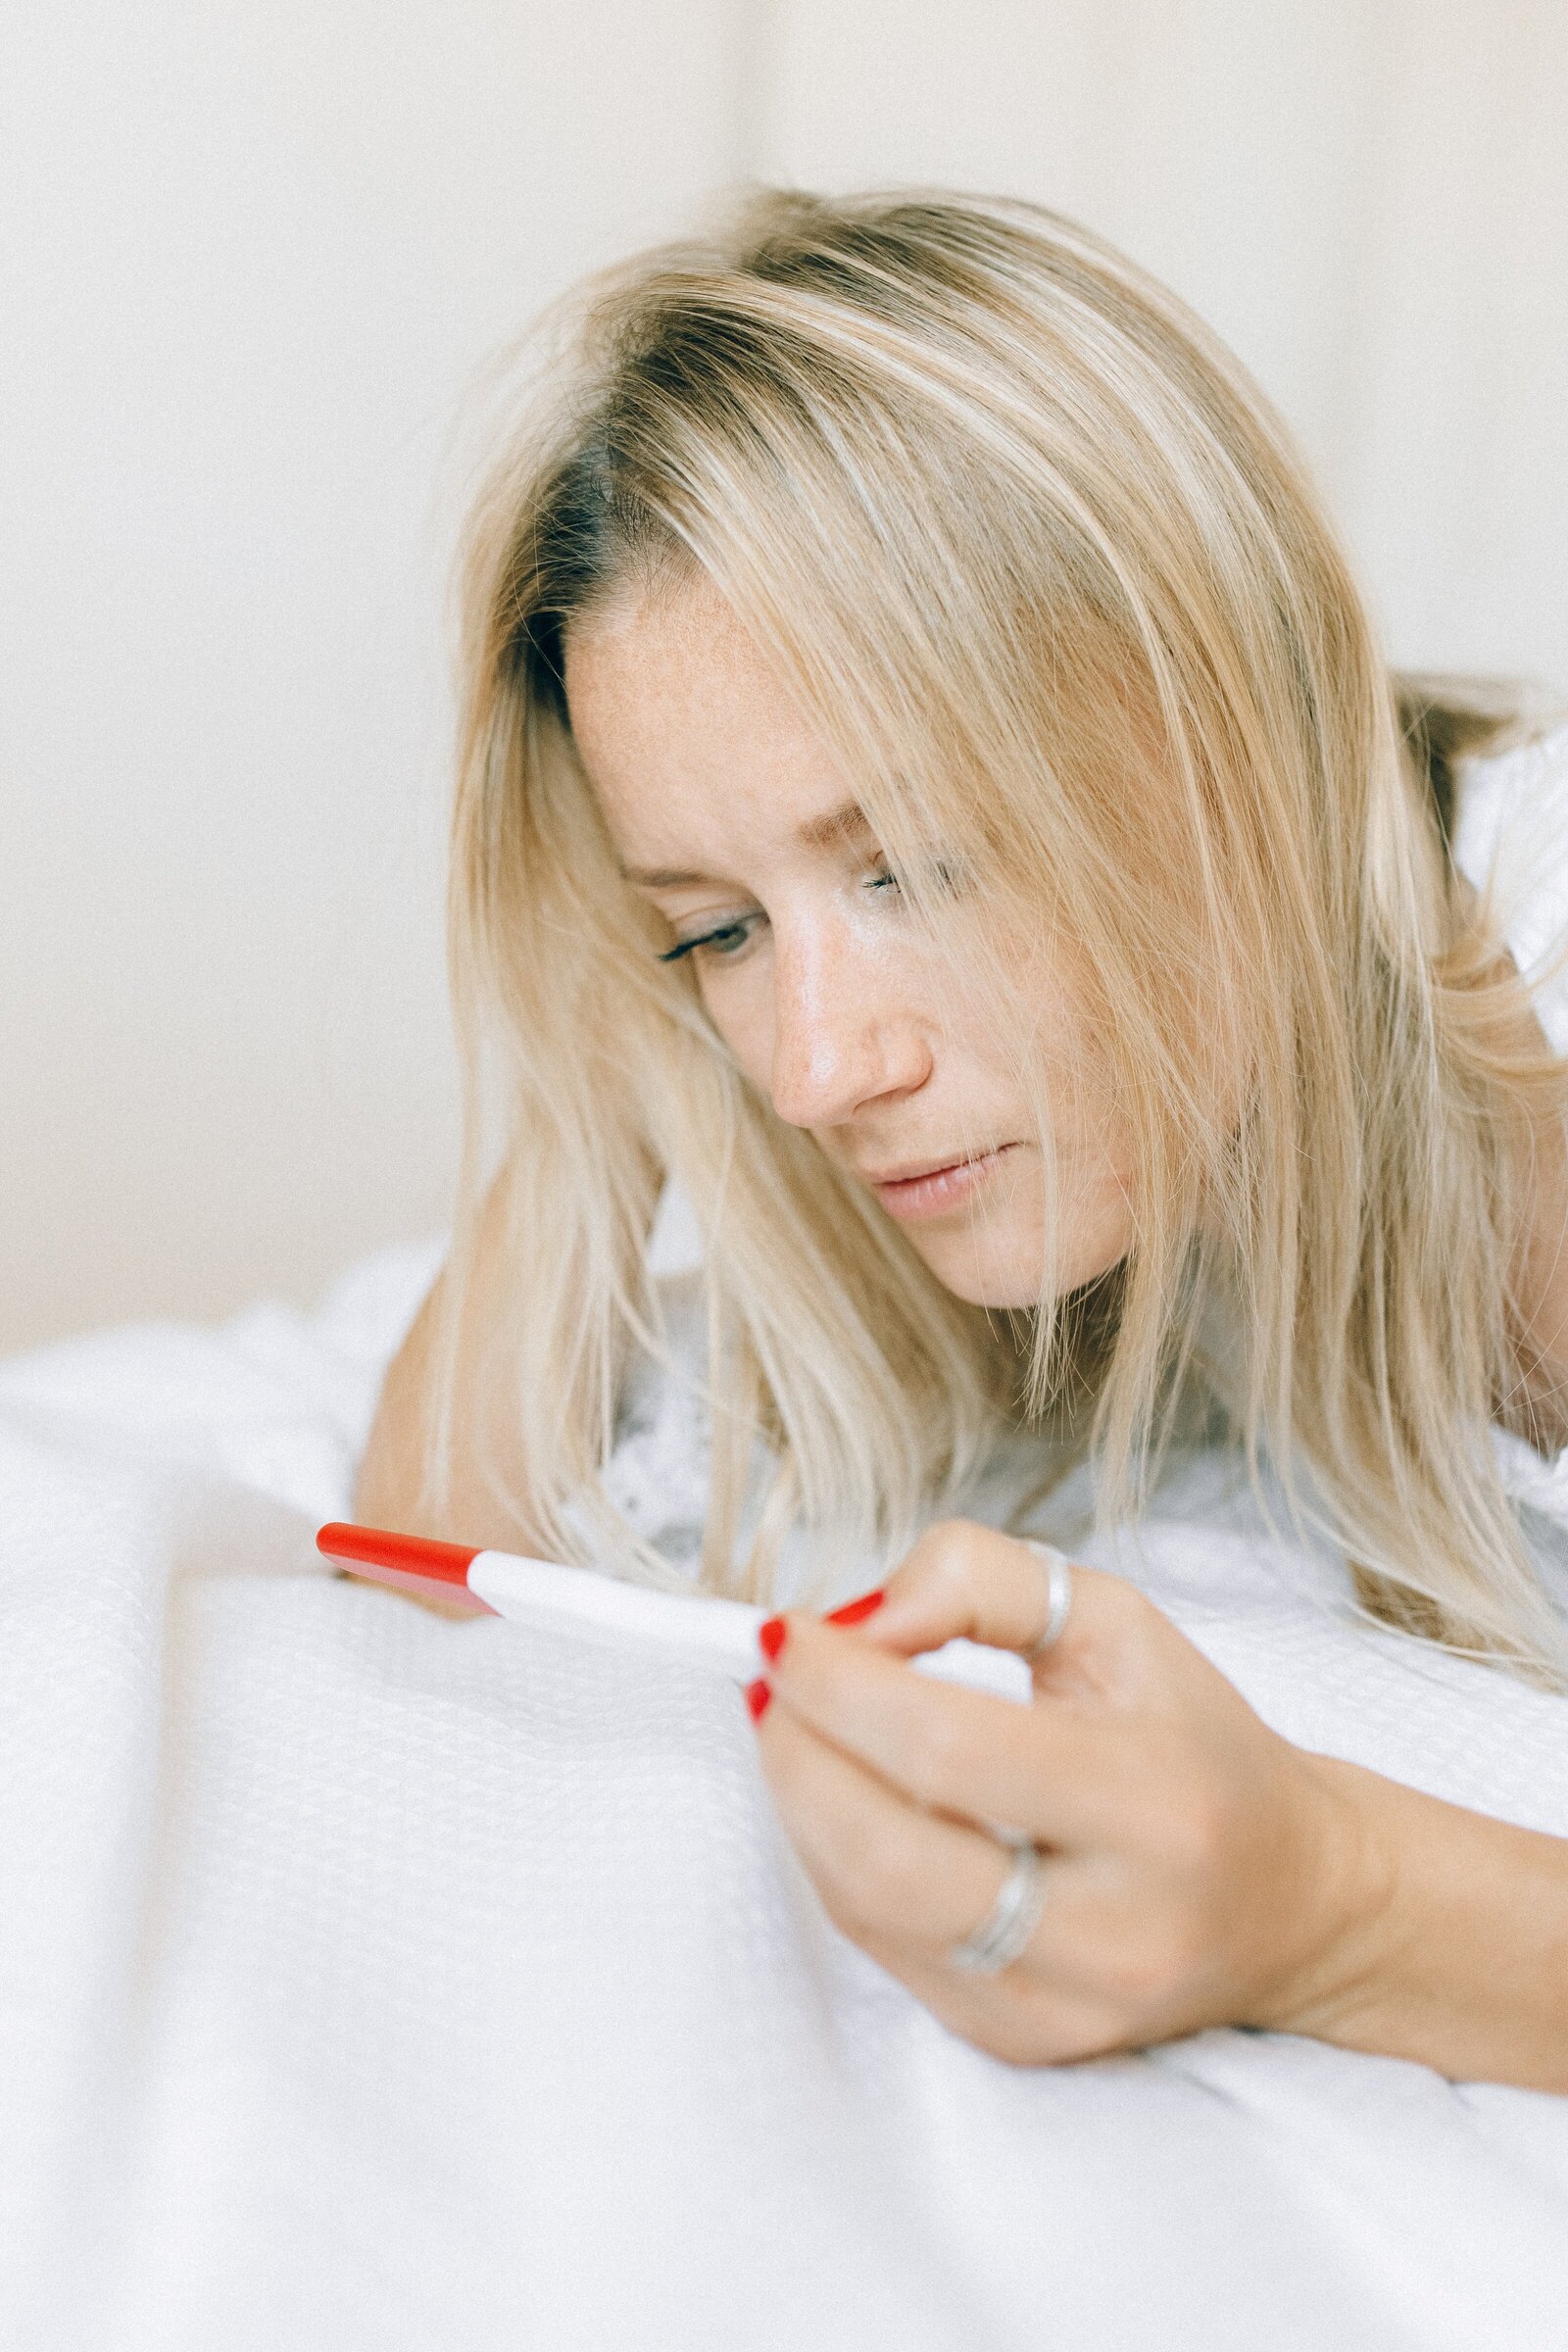 Woman sadly looking at home pregnancy test.